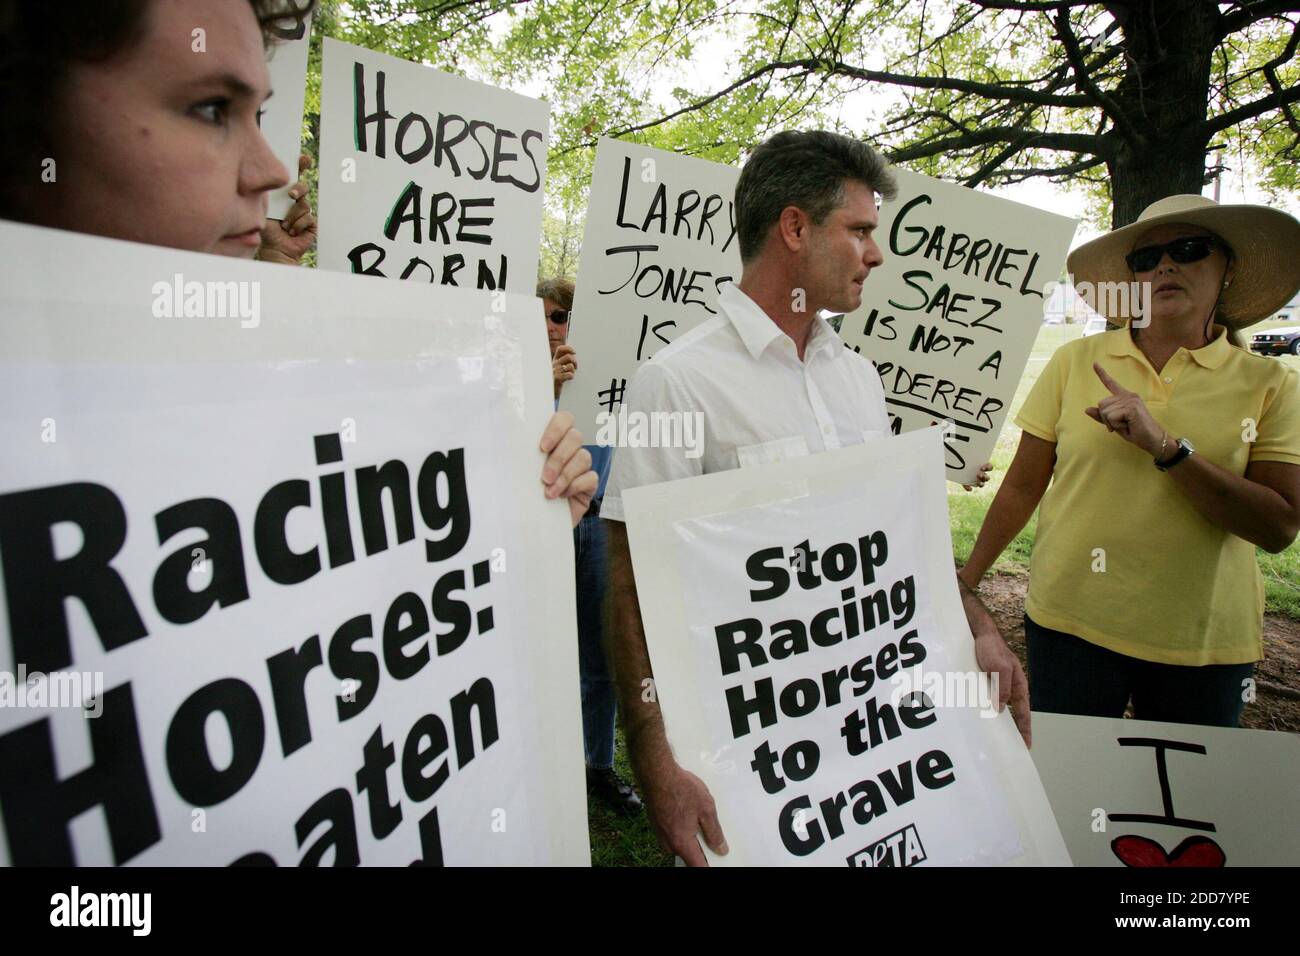 NO FILM, NO VIDEO, NO TV, NO DOCUMENTARY - Kelli O'Brien, left, and Tom Crain, protesters, and Laura Koester, right, supporter, argue during a protest at the Kentucky Horse Racing Authority's headquarters in Lexington, KY, USA on May 6, 2008. PETA has urged the suspension of jockey Gabriel Saez for what it viewed as excessive whipping of Eight Belles during the Kentucky Derby. Photo by Jenn Ackerman/Lexington Herald-Leader/MCT/ABACAPRESS.COM Stock Photo